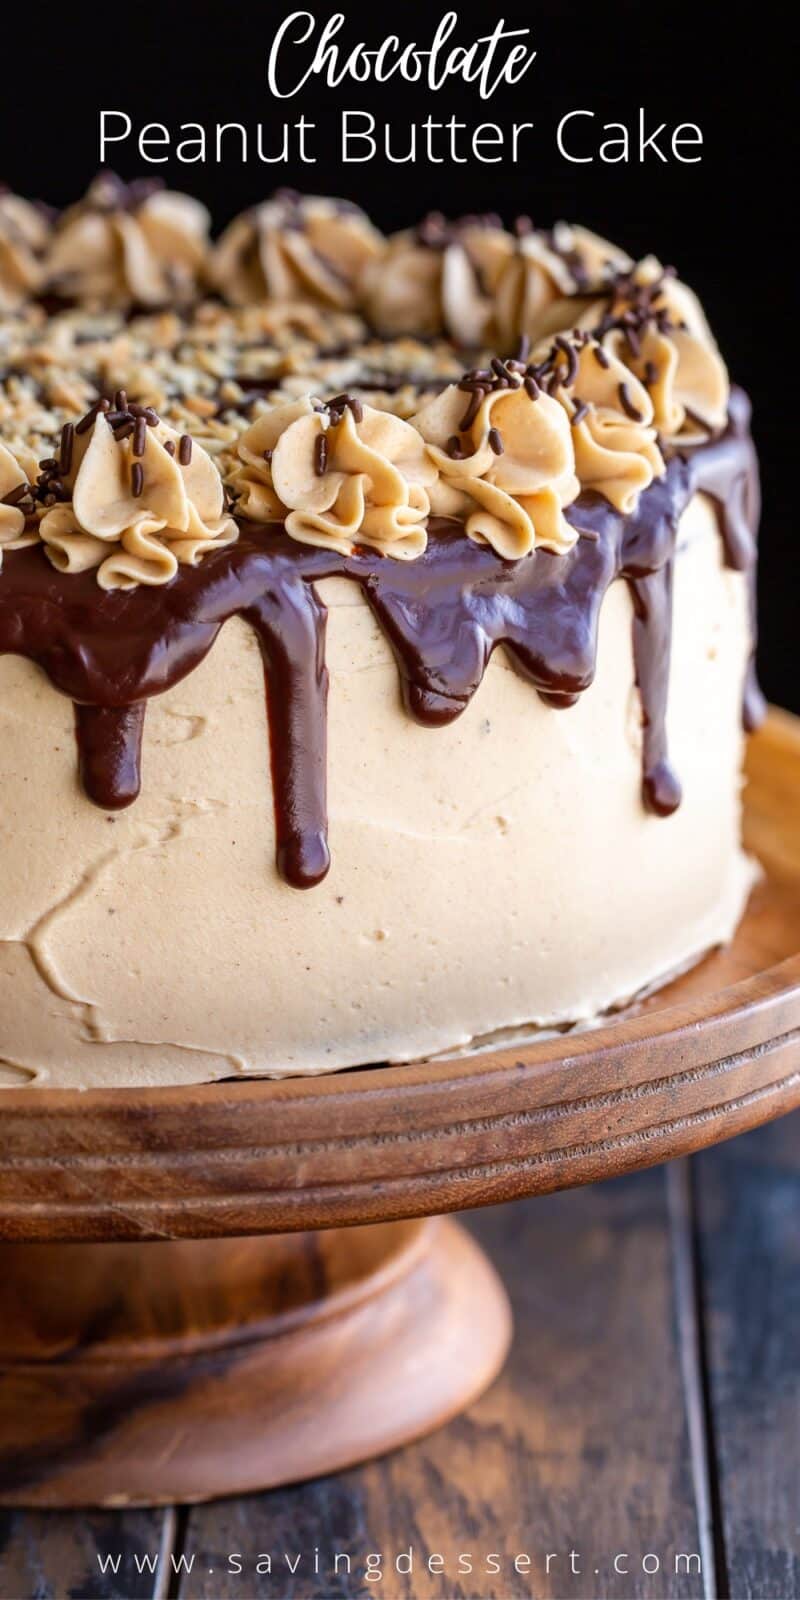 Chocolate Peanut Butter Cake on a wooden cake stand with chocolate ganache drips and swirls of peanut butter frosting